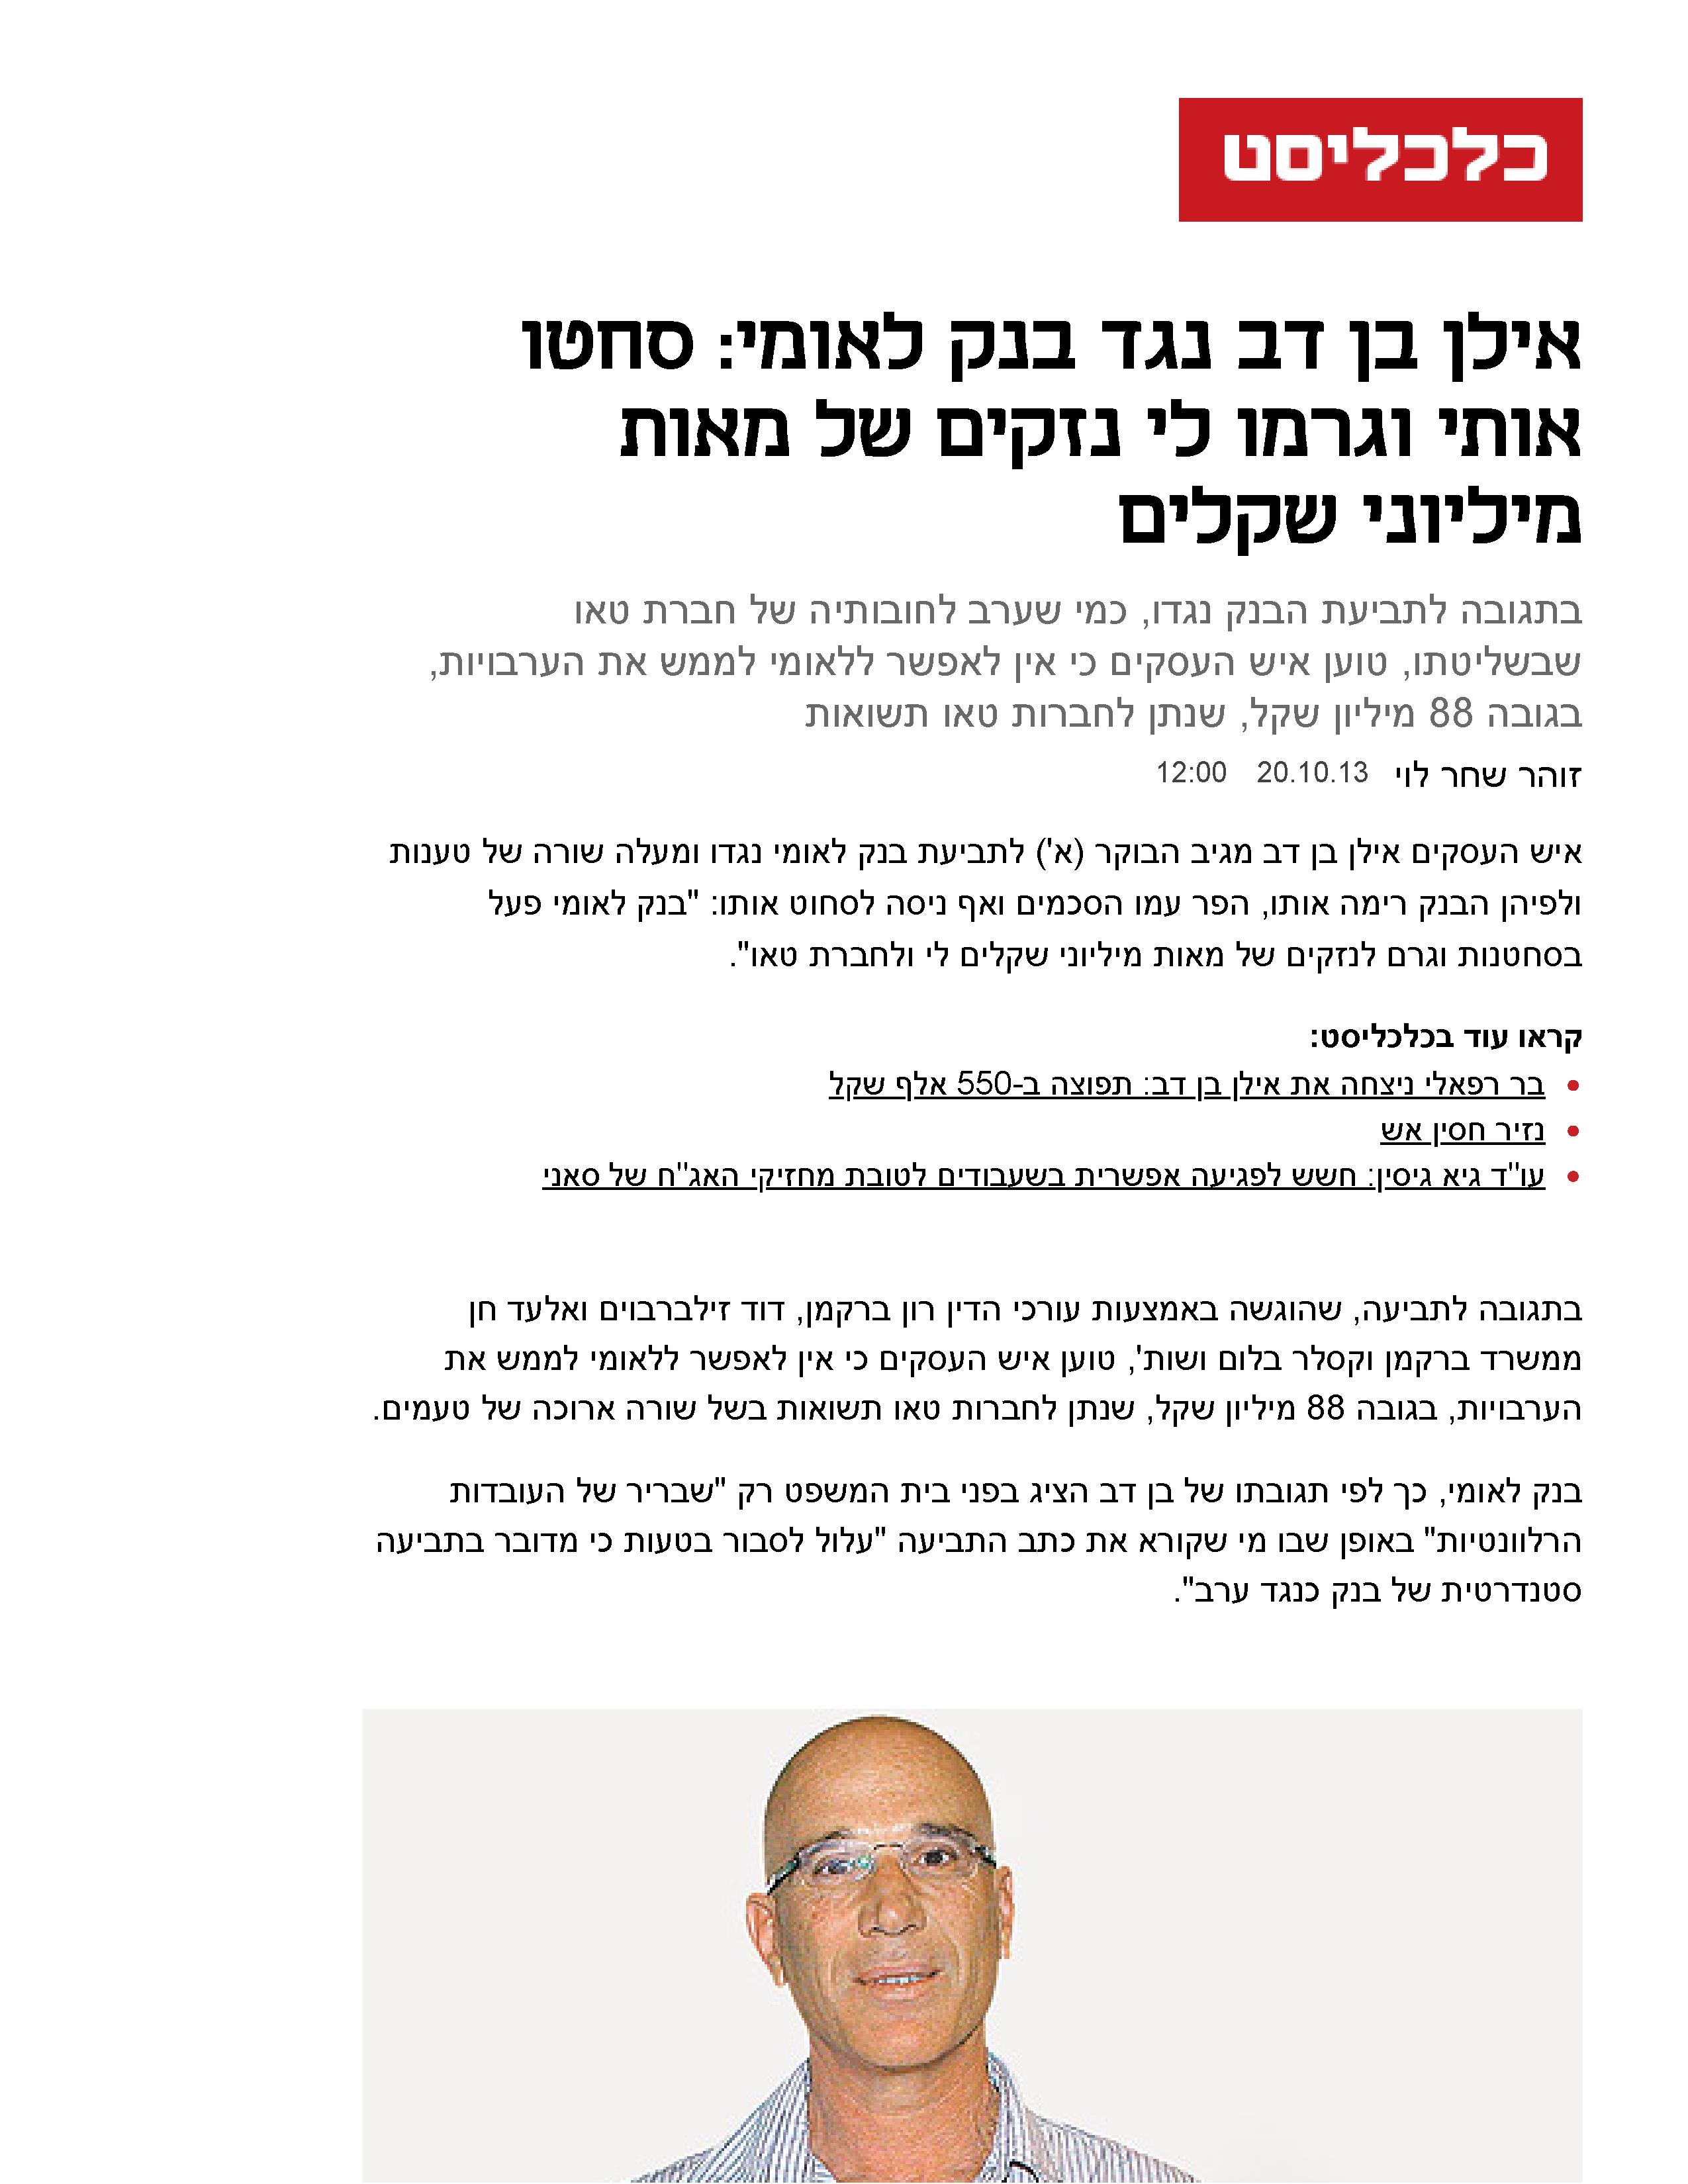 Ilan Ben-Dov against Bank Leumi: They extorted me and caused me hundreds of millions of shekels in damages